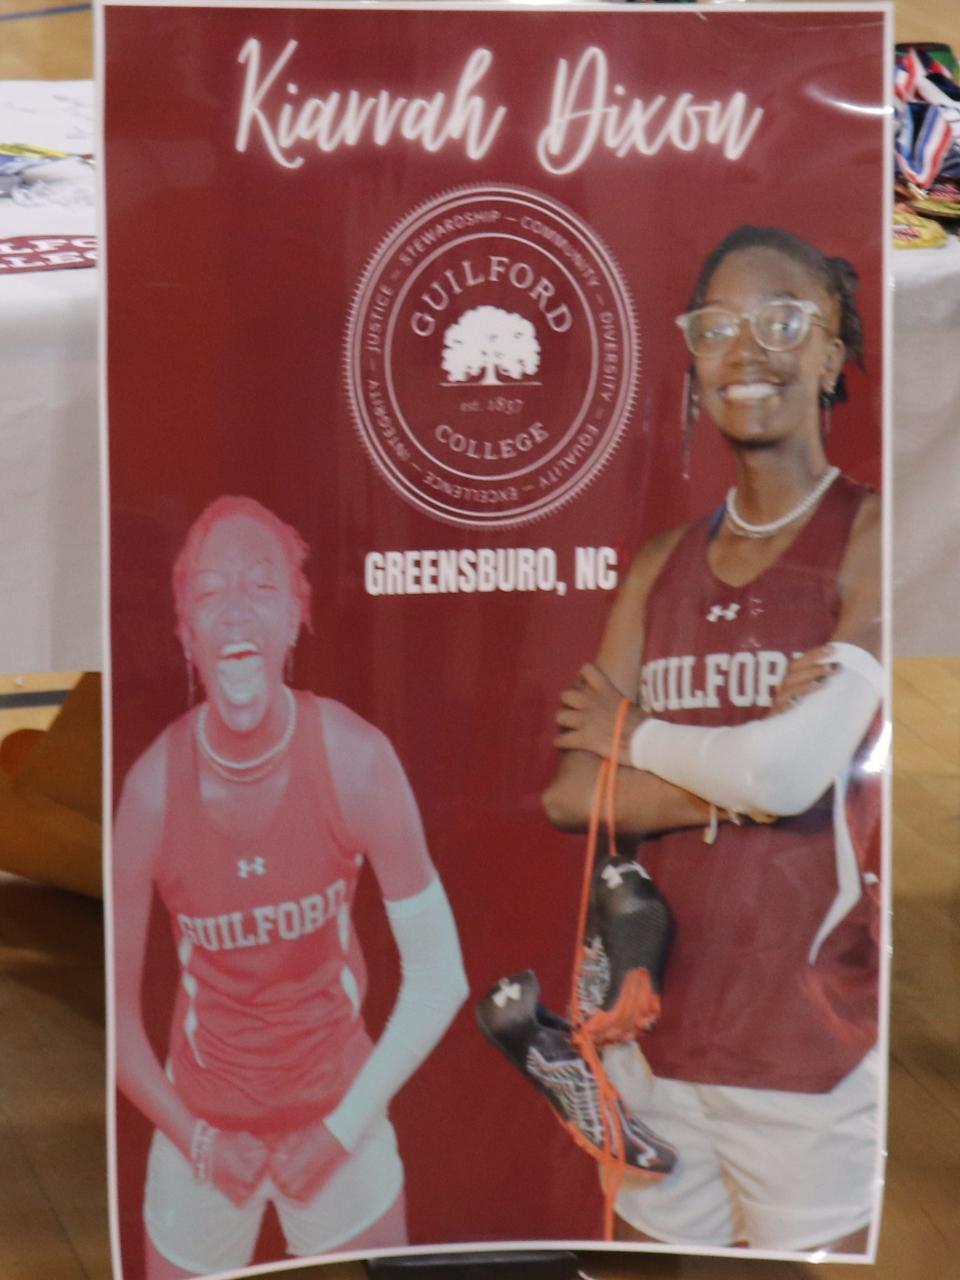 Poster of track and field athlete Kiarrah Dixon at Bear Creek Signing Day after committing to Guilford College on May 20 in Stockton.